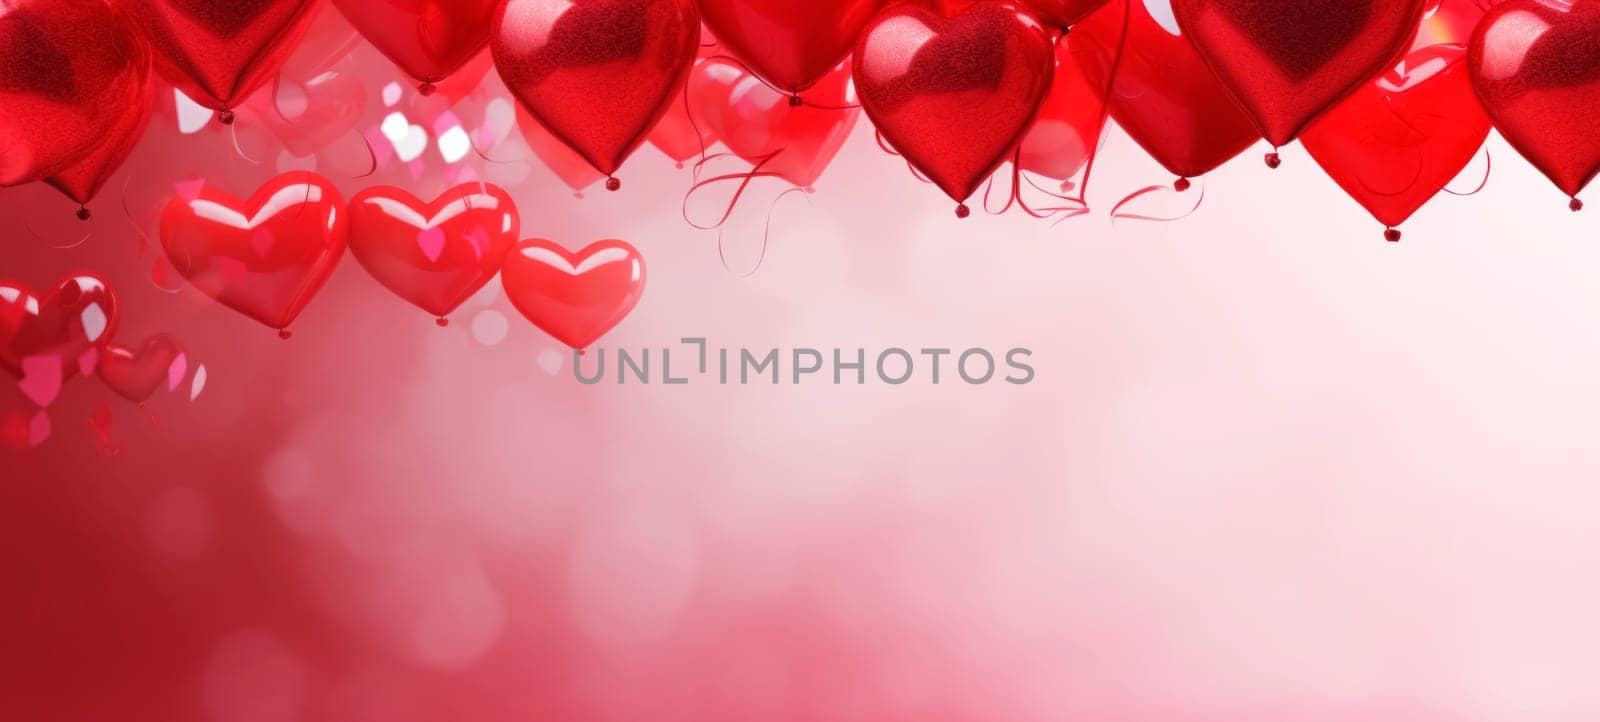 Luminous red heart-shaped balloons overlapping and floating over a soft pink background, creating a festive and romantic mood.